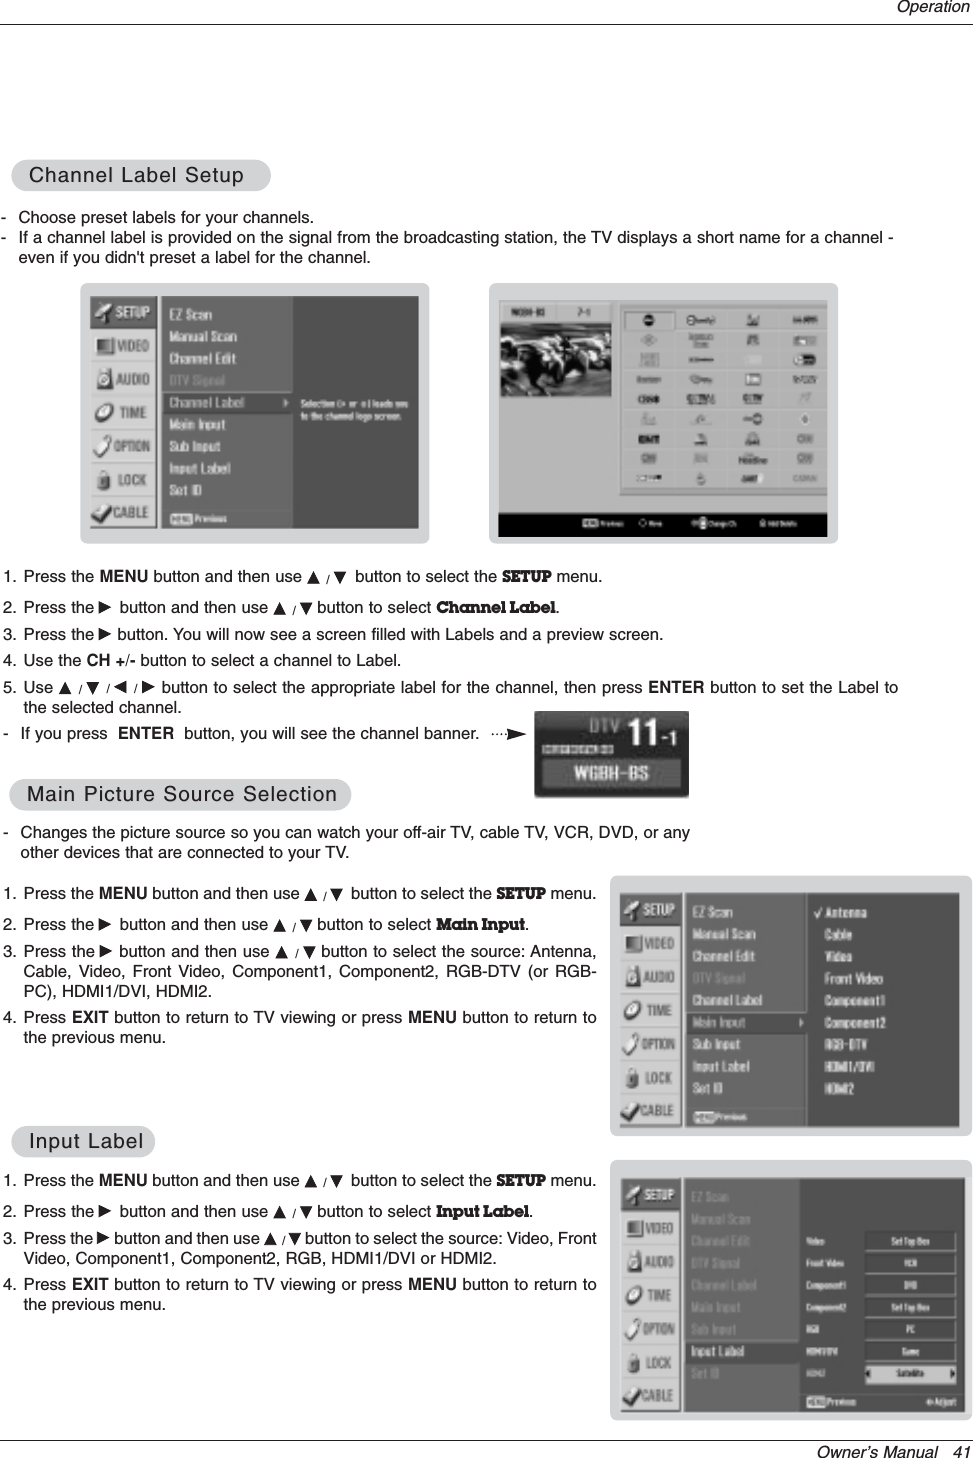 Owner’s Manual   41Operation- Changes the picture source so you can watch your off-air TV, cable TV, VCR, DVD, or anyother devices that are connected to your TV. 1. Press the MENU button and then use D/Ebutton to select the SETUP menu.2. Press the Gbutton and then use D/Ebutton to select Main Input.3. Press the Gbutton and then use D/Ebutton to select the source: Antenna,Cable, Video, Front Video, Component1, Component2, RGB-DTV (or RGB-PC), HDMI1/DVI, HDMI2.4. Press EXIT button to return to TV viewing or press MENU button to return tothe previous menu.Main Picture Source SelectionMain Picture Source Selection1. Press the MENU button and then use D/Ebutton to select the SETUP menu.2. Press the Gbutton and then use D/Ebutton to select Input Label.3. Press the Gbutton and then use D/Ebutton to select the source: Video, FrontVideo, Component1, Component2, RGB, HDMI1/DVI or HDMI2.4. Press EXIT button to return to TV viewing or press MENU button to return tothe previous menu.Input LabelInput Label- Choose preset labels for your channels. - If a channel label is provided on the signal from the broadcasting station, the TV displays a short name for a channel -even if you didn&apos;t preset a label for the channel.1. Press the MENU button and then use D/Ebutton to select the SETUP menu.2. Press the Gbutton and then use D/Ebutton to select Channel Label.3. Press the Gbutton. You will now see a screen filled with Labels and a preview screen.4. Use the CH +/- button to select a channel to Label. 5. Use D/E/F/Gbutton to select the appropriate label for the channel, then press ENTER button to set the Label tothe selected channel.- If you press  ENTER button, you will see the channel banner. Channel Label SetupChannel Label Setup